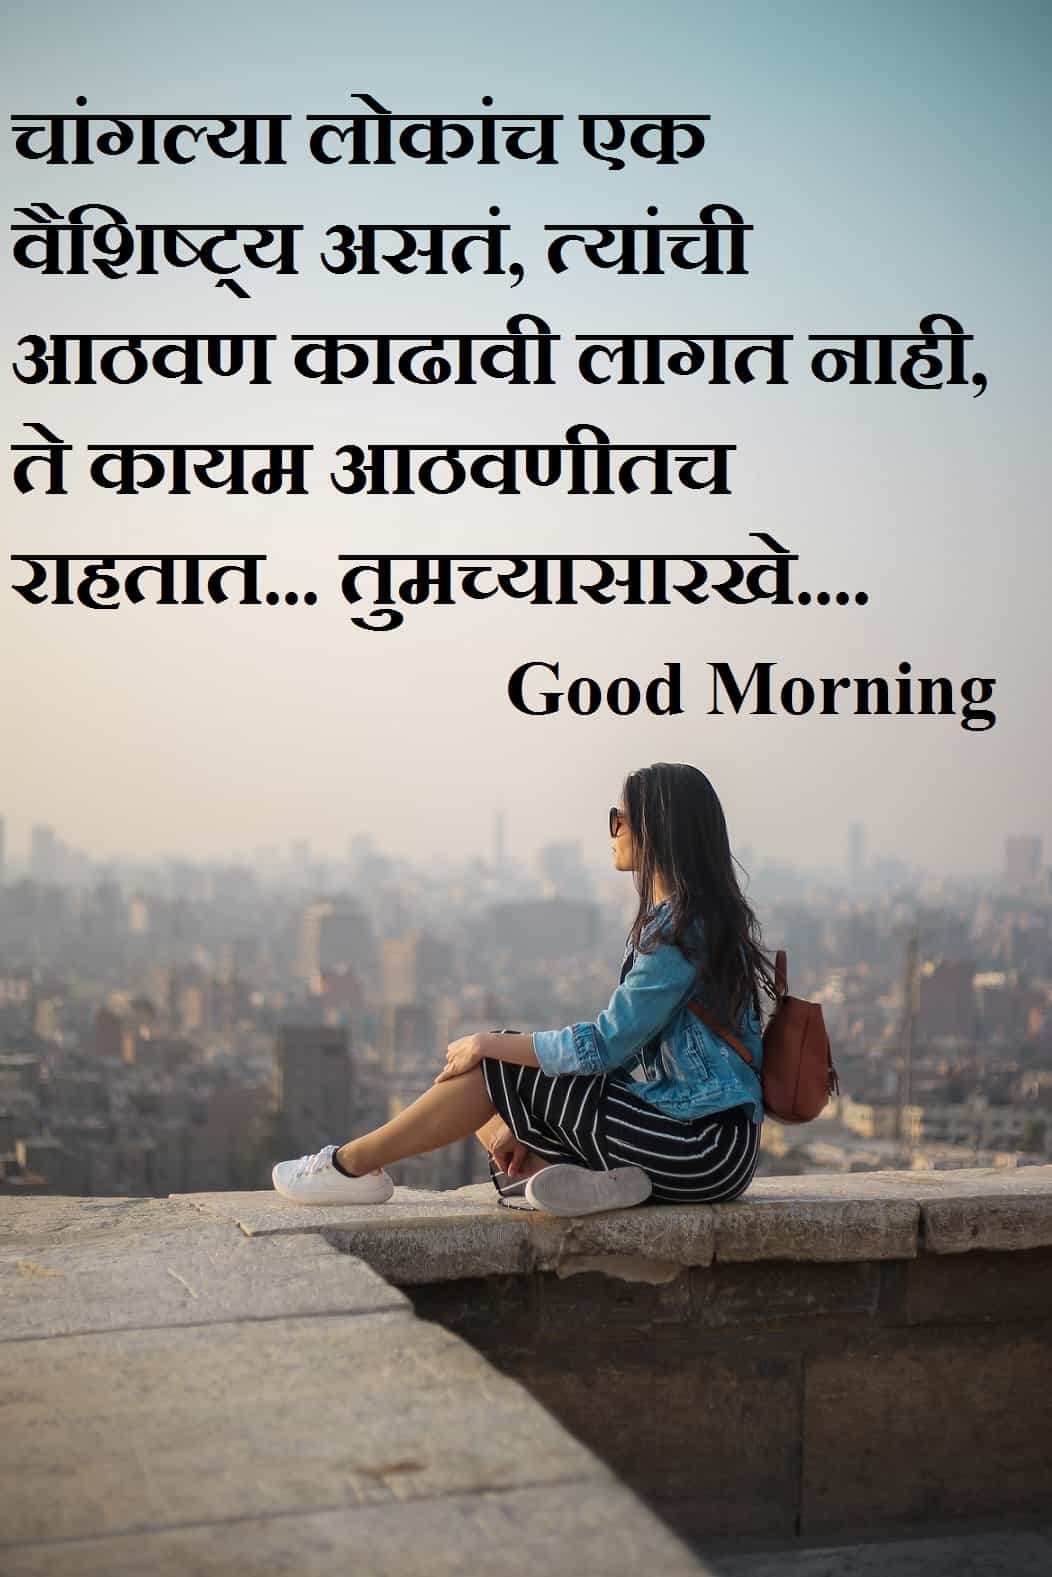 Top 100 Good Morning Message In Marathi Good Morning Messages Get good morning wishes, pictures at wishgoodmorning.org. share thumb